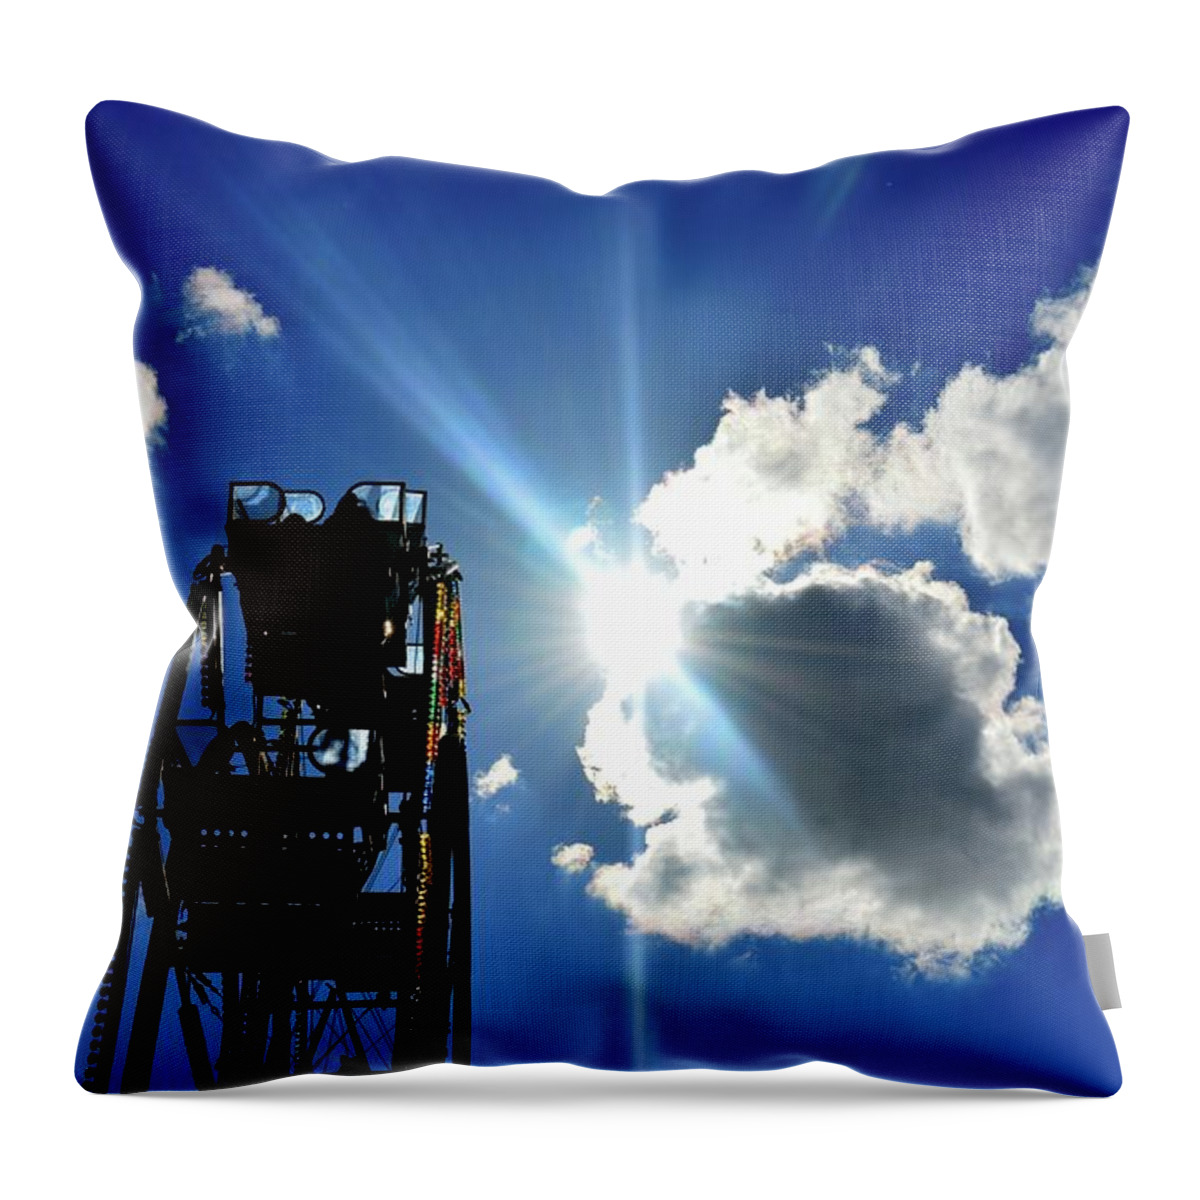 Abstract Throw Pillow featuring the photograph The Ferris Wheel by Lyle Crump